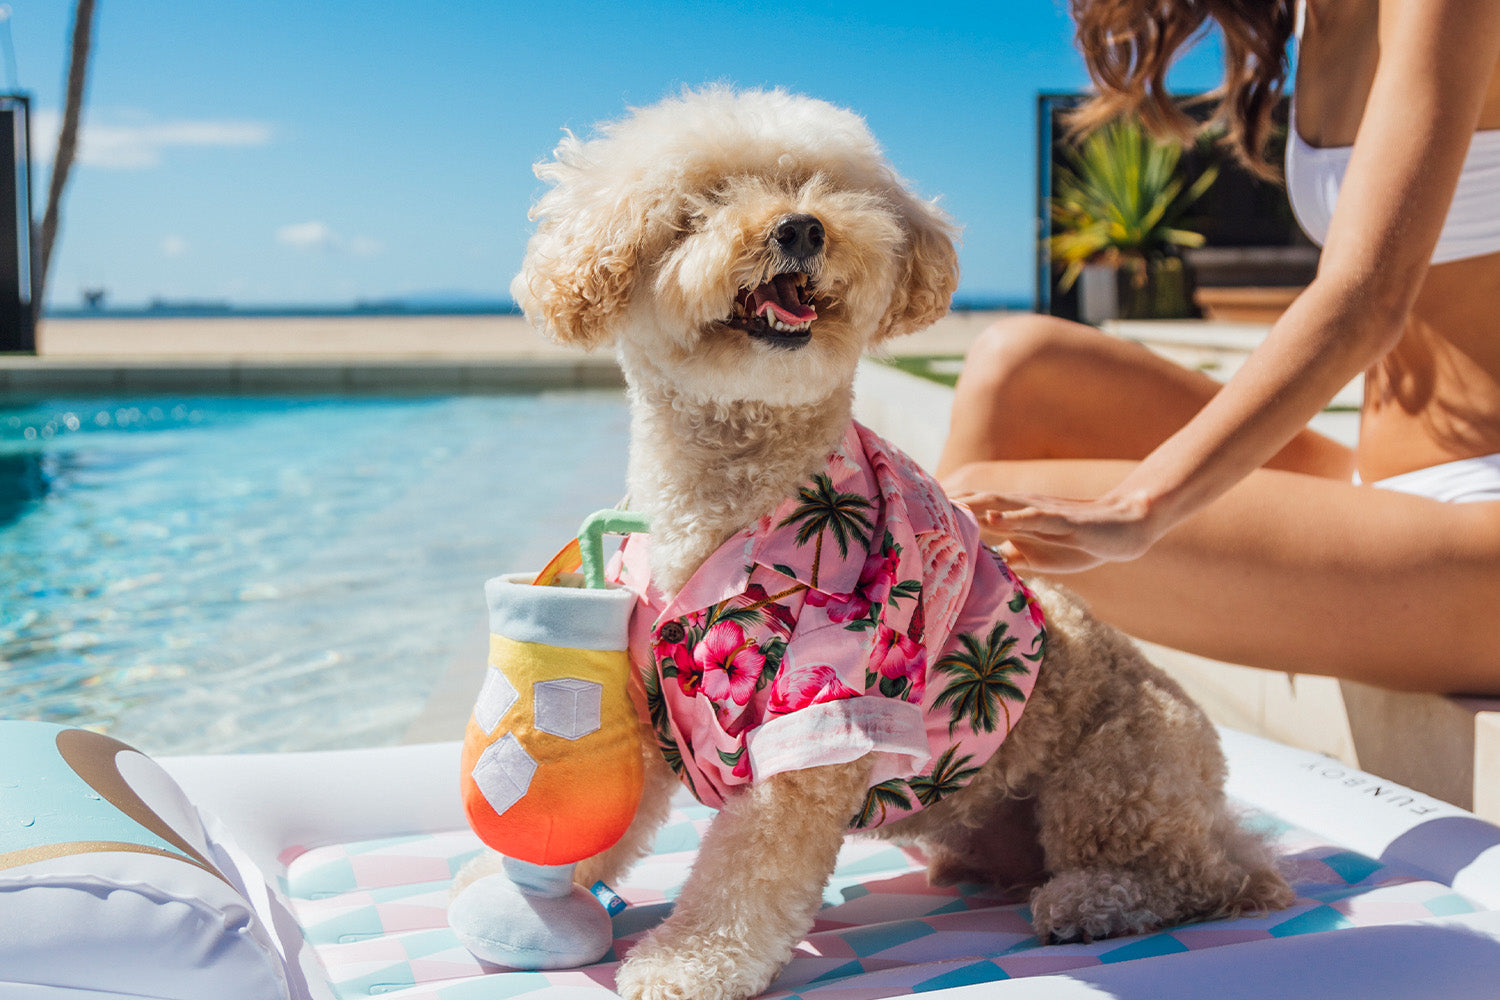 Dog-Friendly Beaches To Take Your Pets This Summer